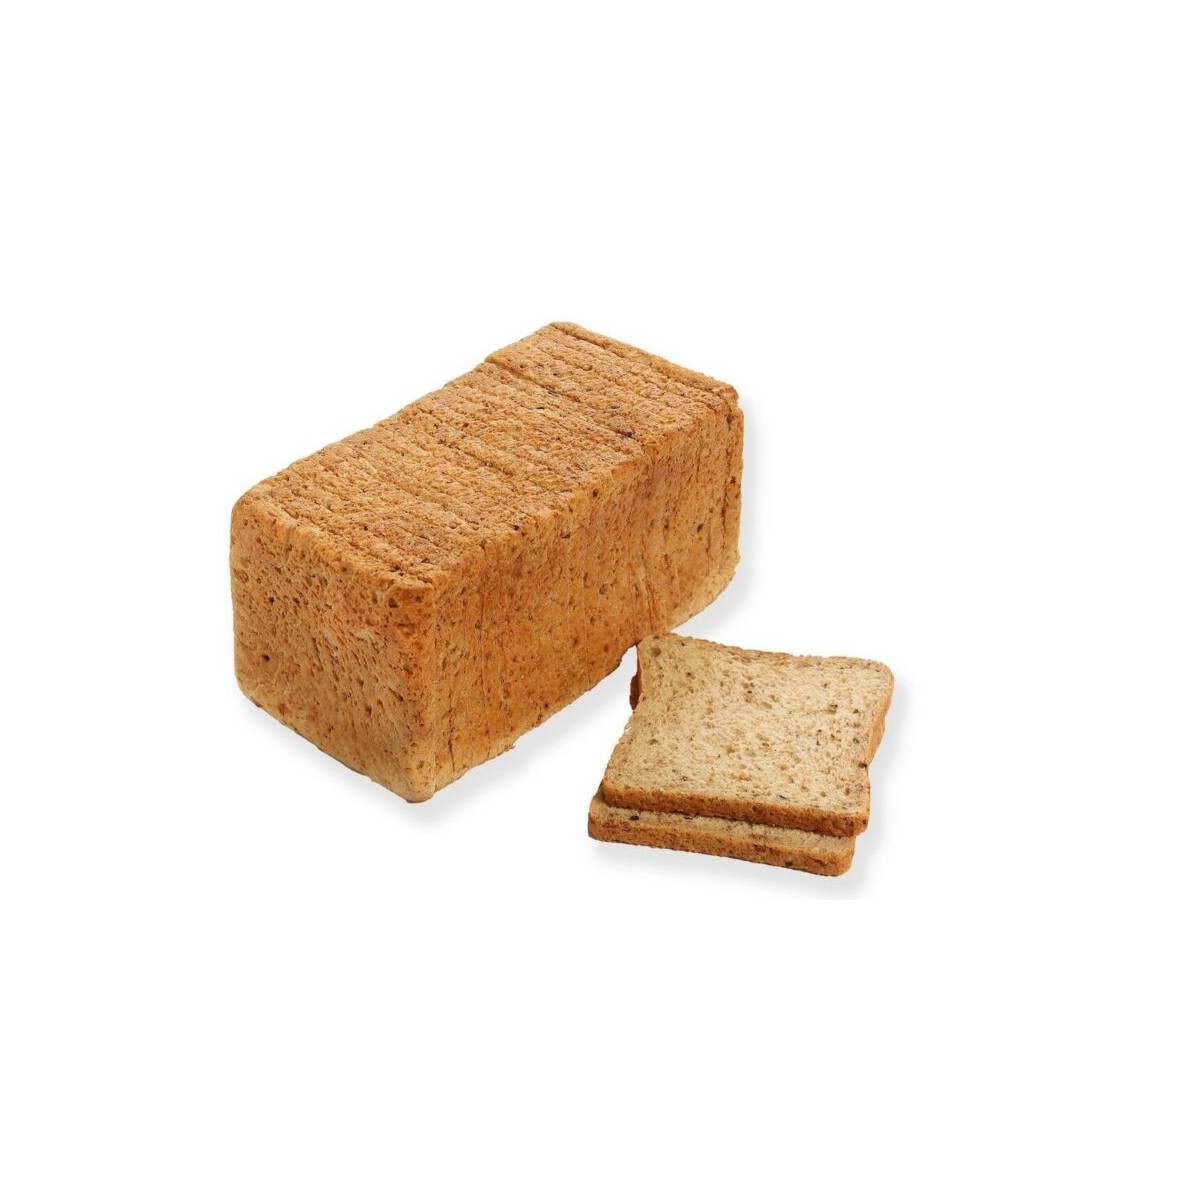 PASTRIDOR 225608 PAIN TOAST PREMIUM COUNTRY 20+2 TRANCHES 10 X 800G